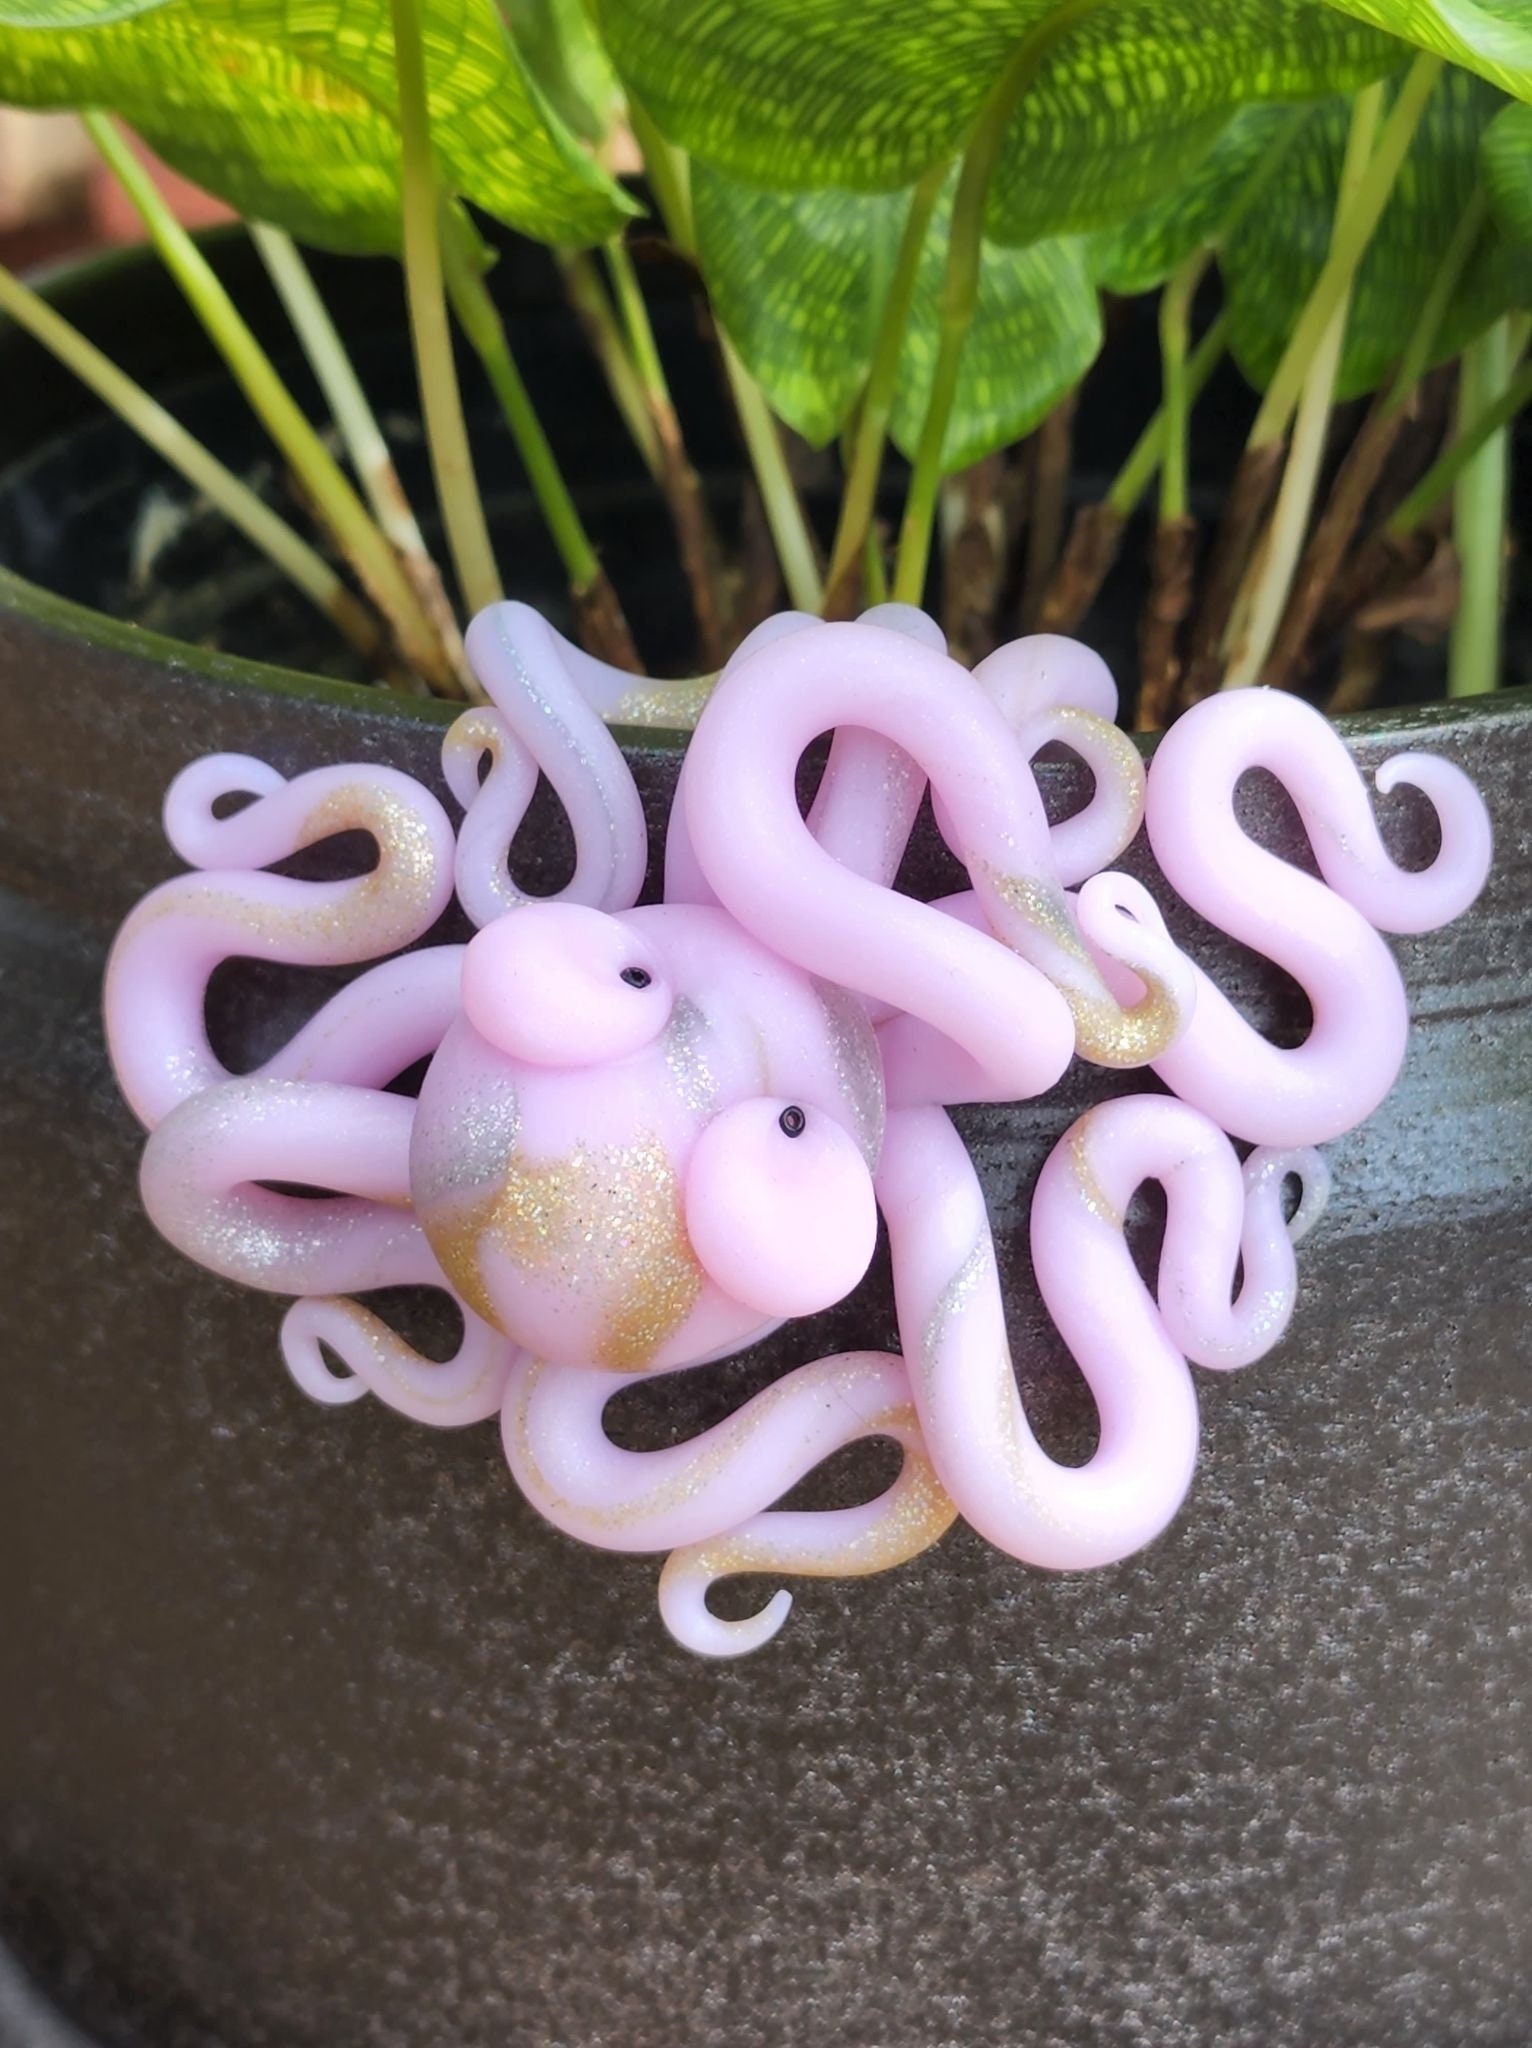 Tentacle Houseplant Octopus Planter Sculpture Terra Cotta Planter Paper  Clay Air-dry Clay Monster Ooak Handmade Pink Nightmare Fake Plant 